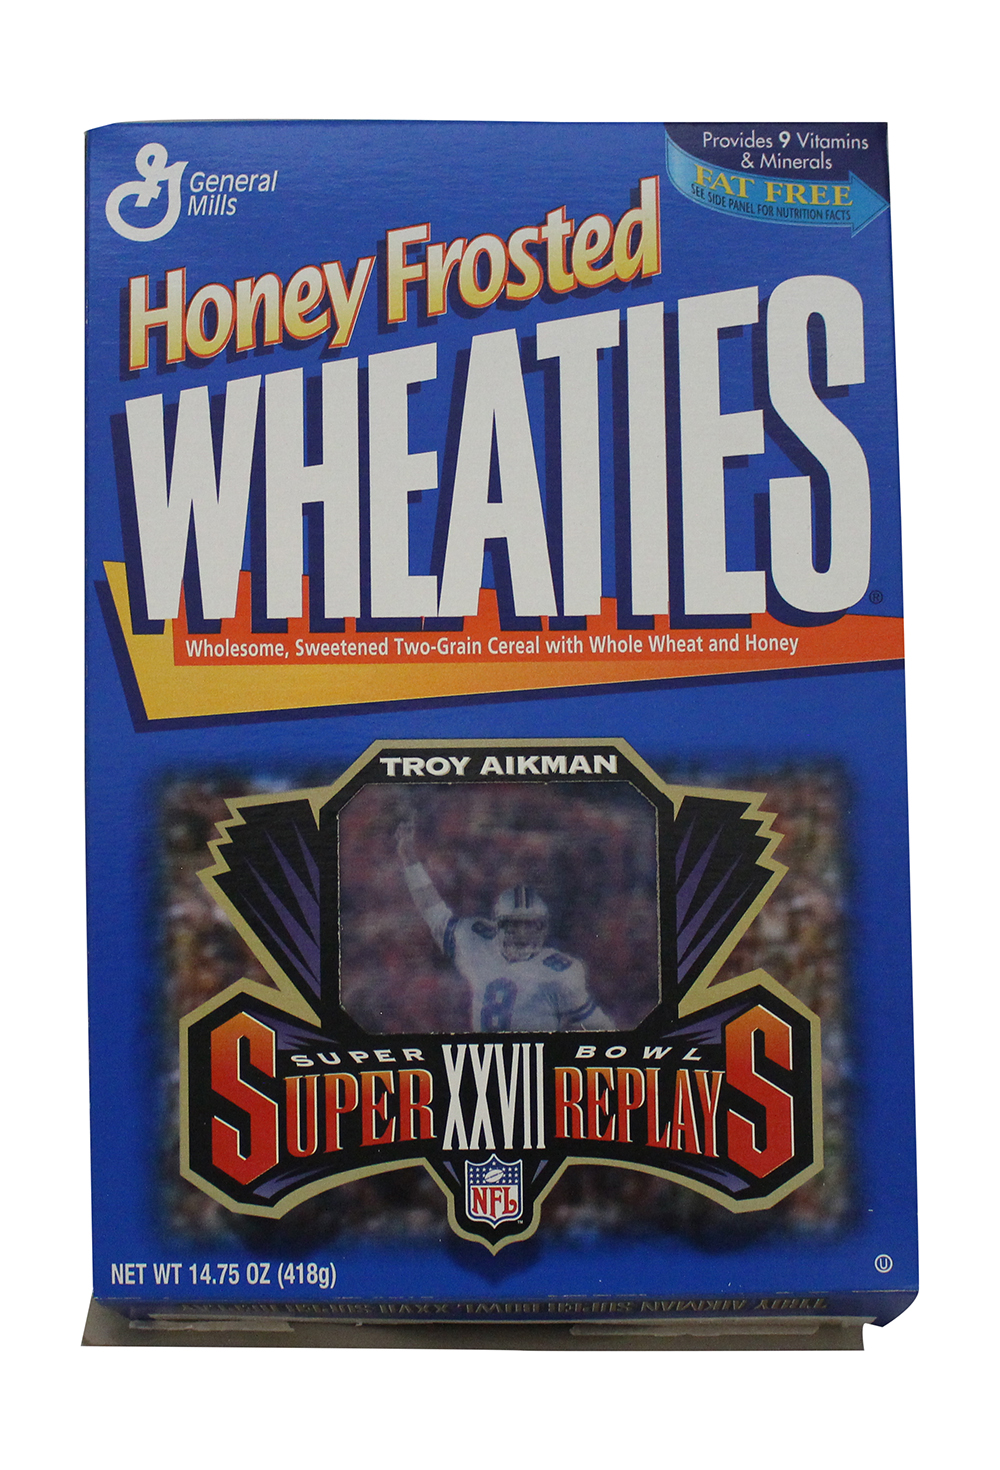 Super Bowl XXVII Dallas Cowboys Aikman Frosted Wheaties Box Flattened 32016